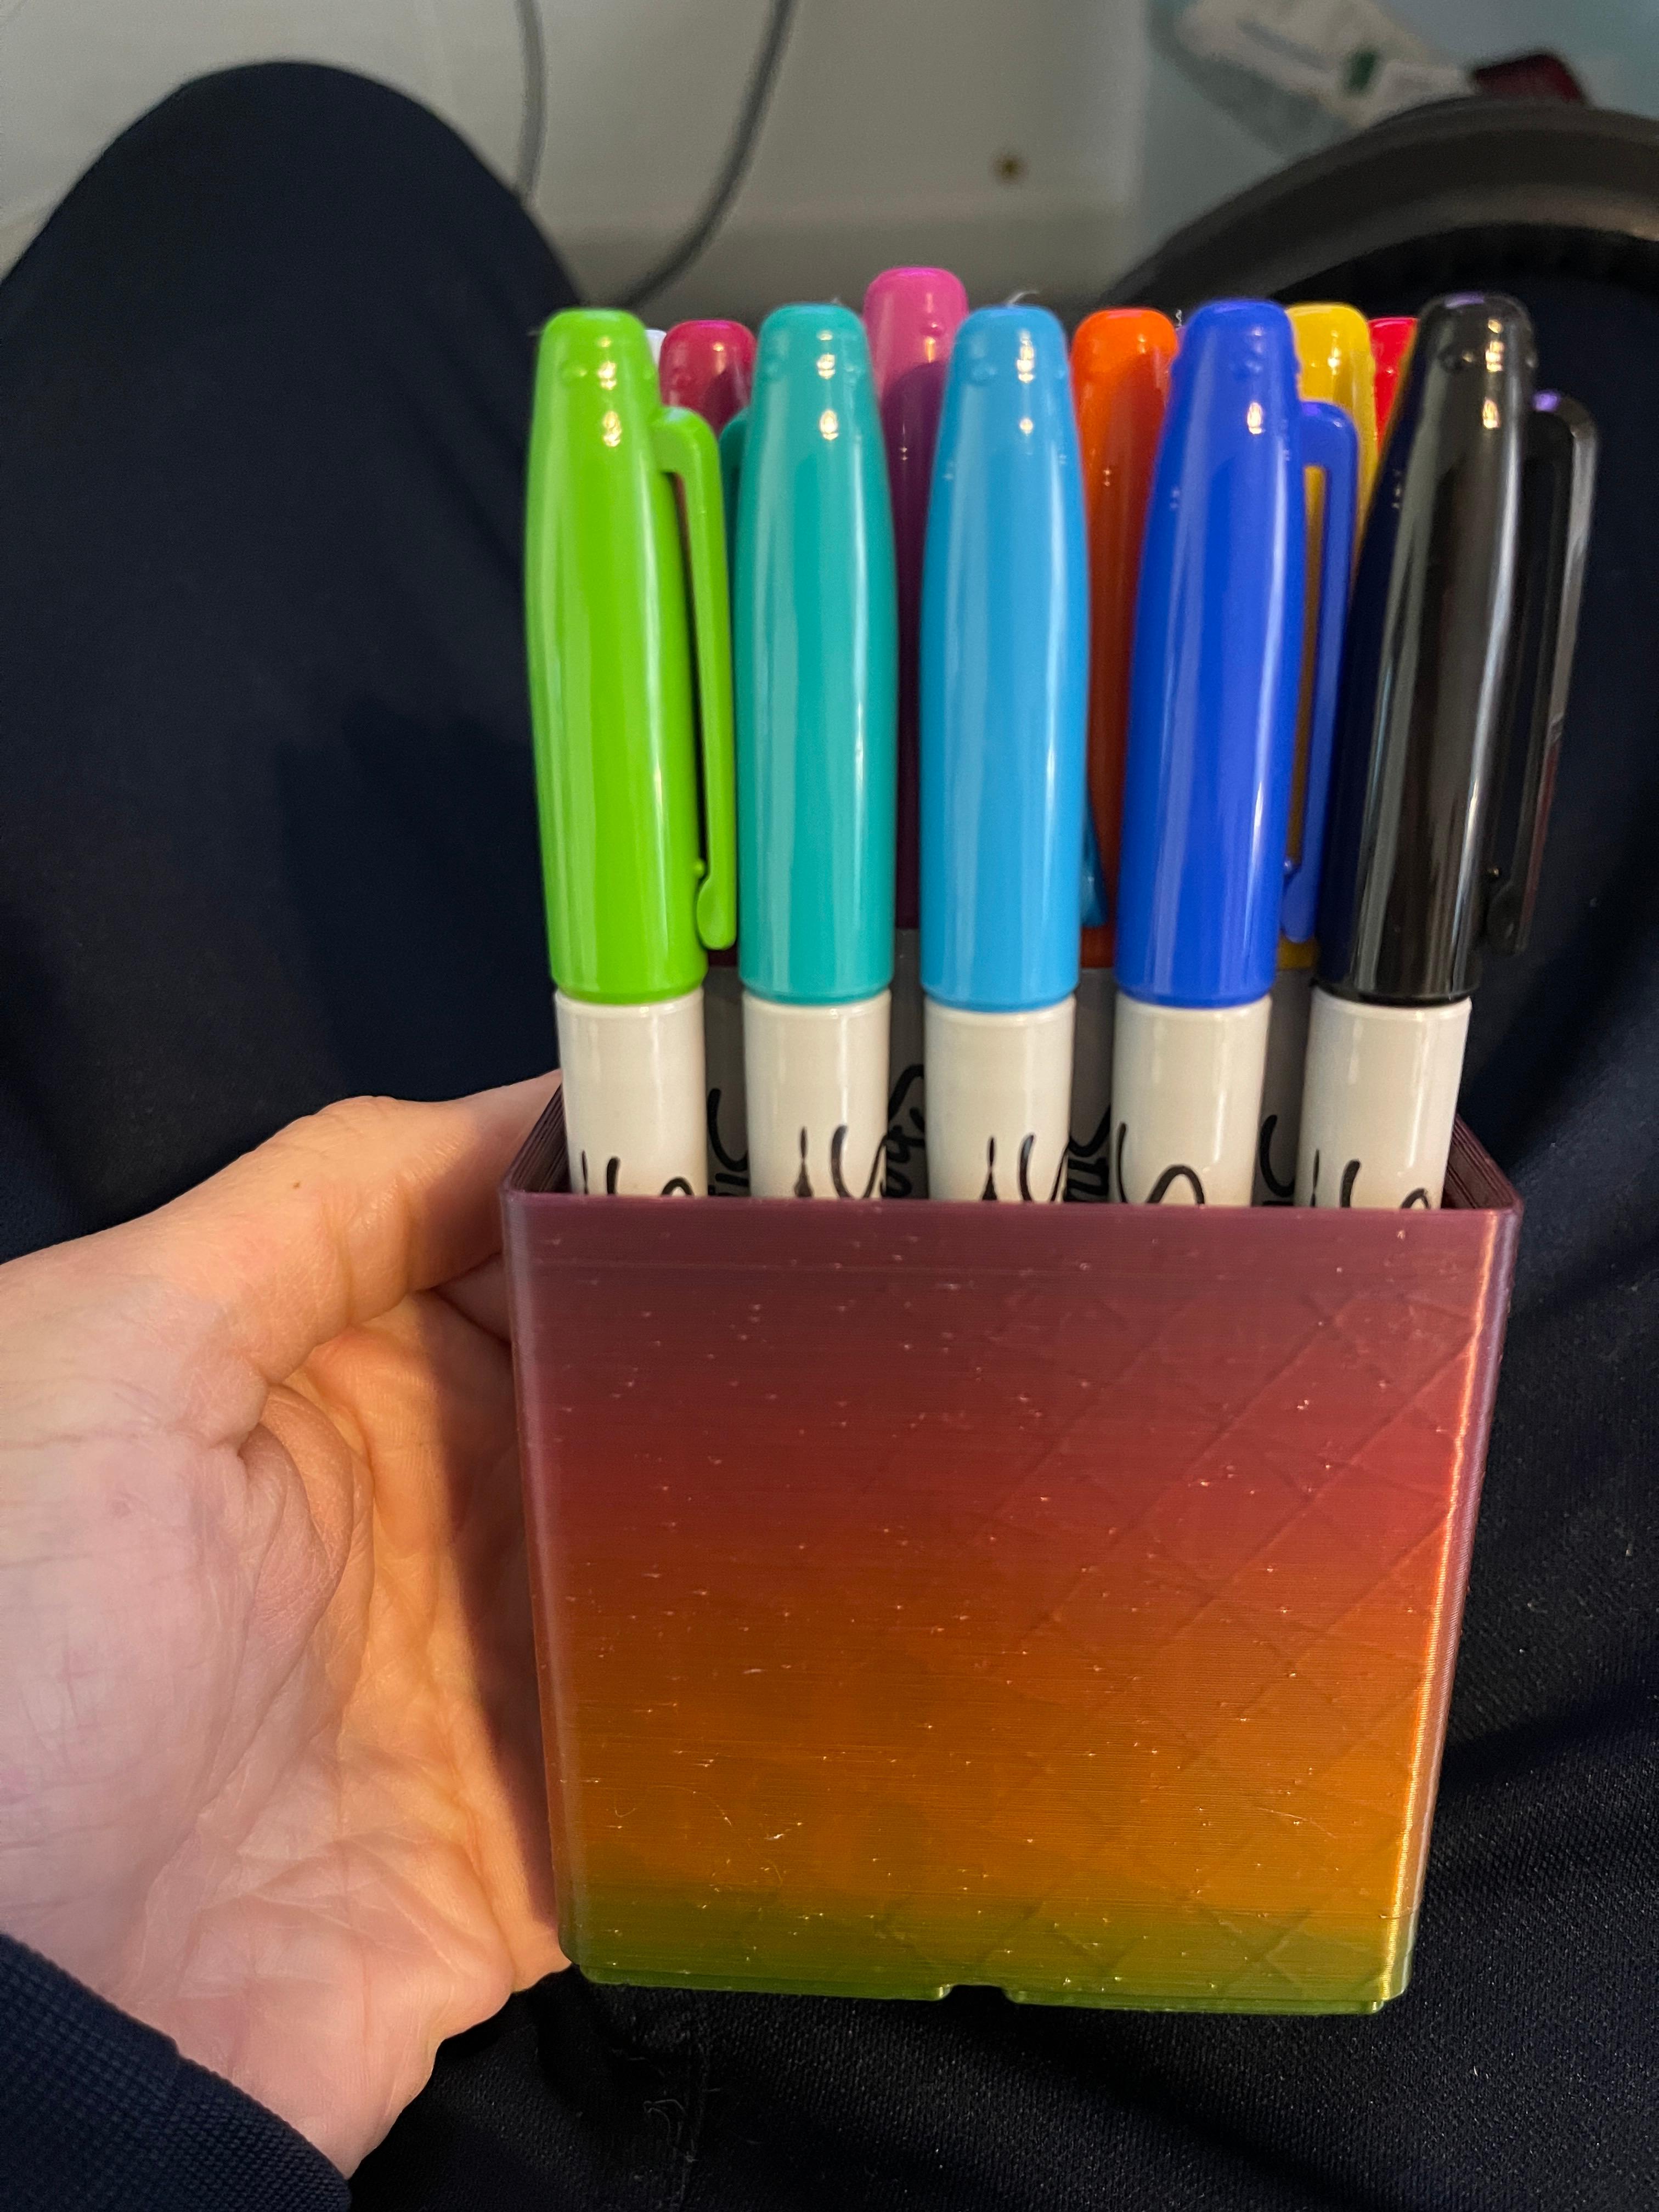 #Gridfinity Sharpie Holders - The sharpies fit nice and snug inside. If you have every hole filled it might be a 2 hand job to grab the ones in the center, but not a big deal. For things a little skinnier like pens/pencils this won't be an issue. I thought it would be too tall overall, but I like where the sharpies sit inside and it has a nice weight balance. - 3d model